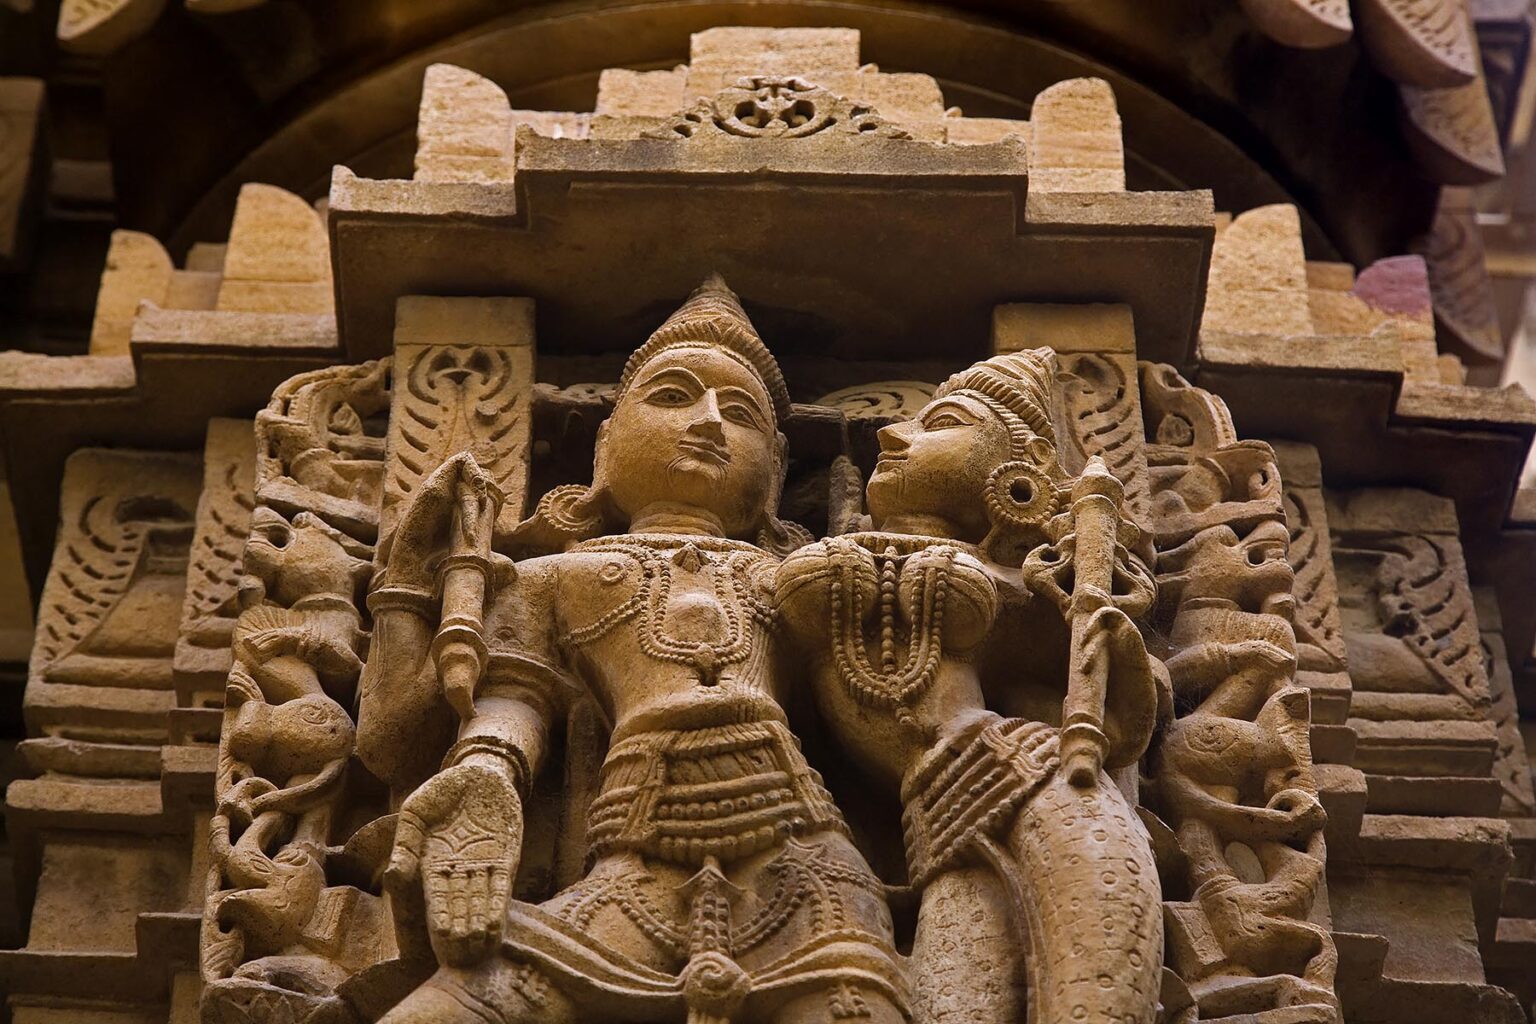 Hand carved sandstone statues of a KING and his CONSORT in the CHANDRAPRABHU JAIN TEMPLE inside JAISALMER FORT - RAJASTHAN, INDIA